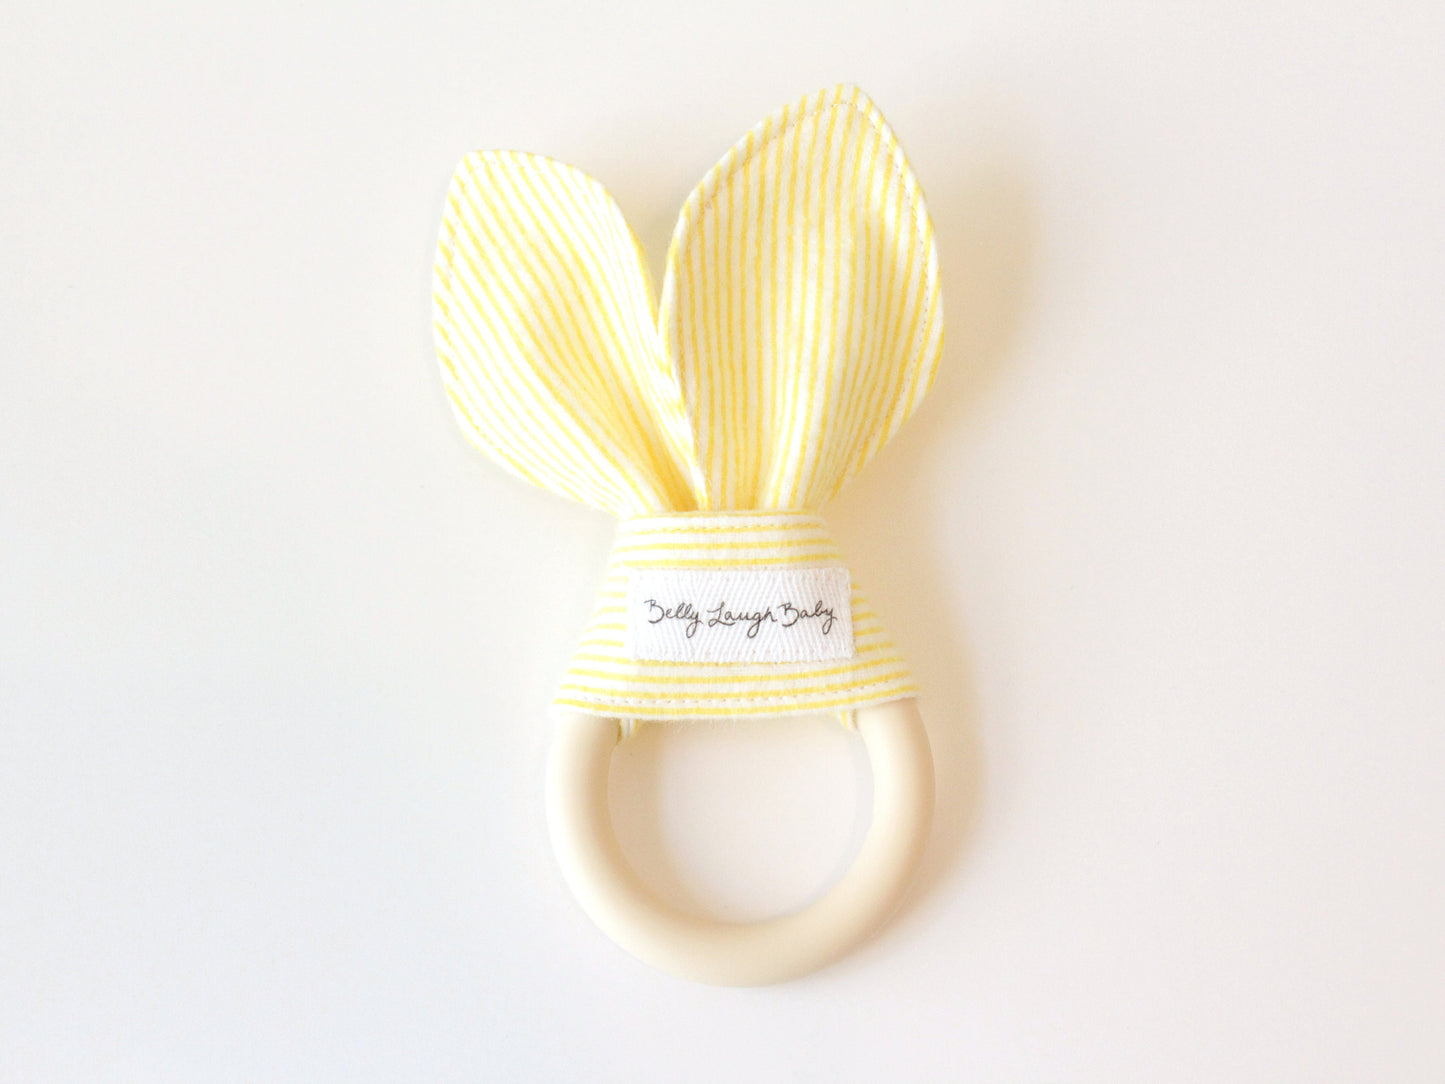 Yellow Striped Bunny Ear Teether and Pacifier Clip Bundle | Gender Neutral Baby Shower Gift Bundle Set | CPSC Compliant